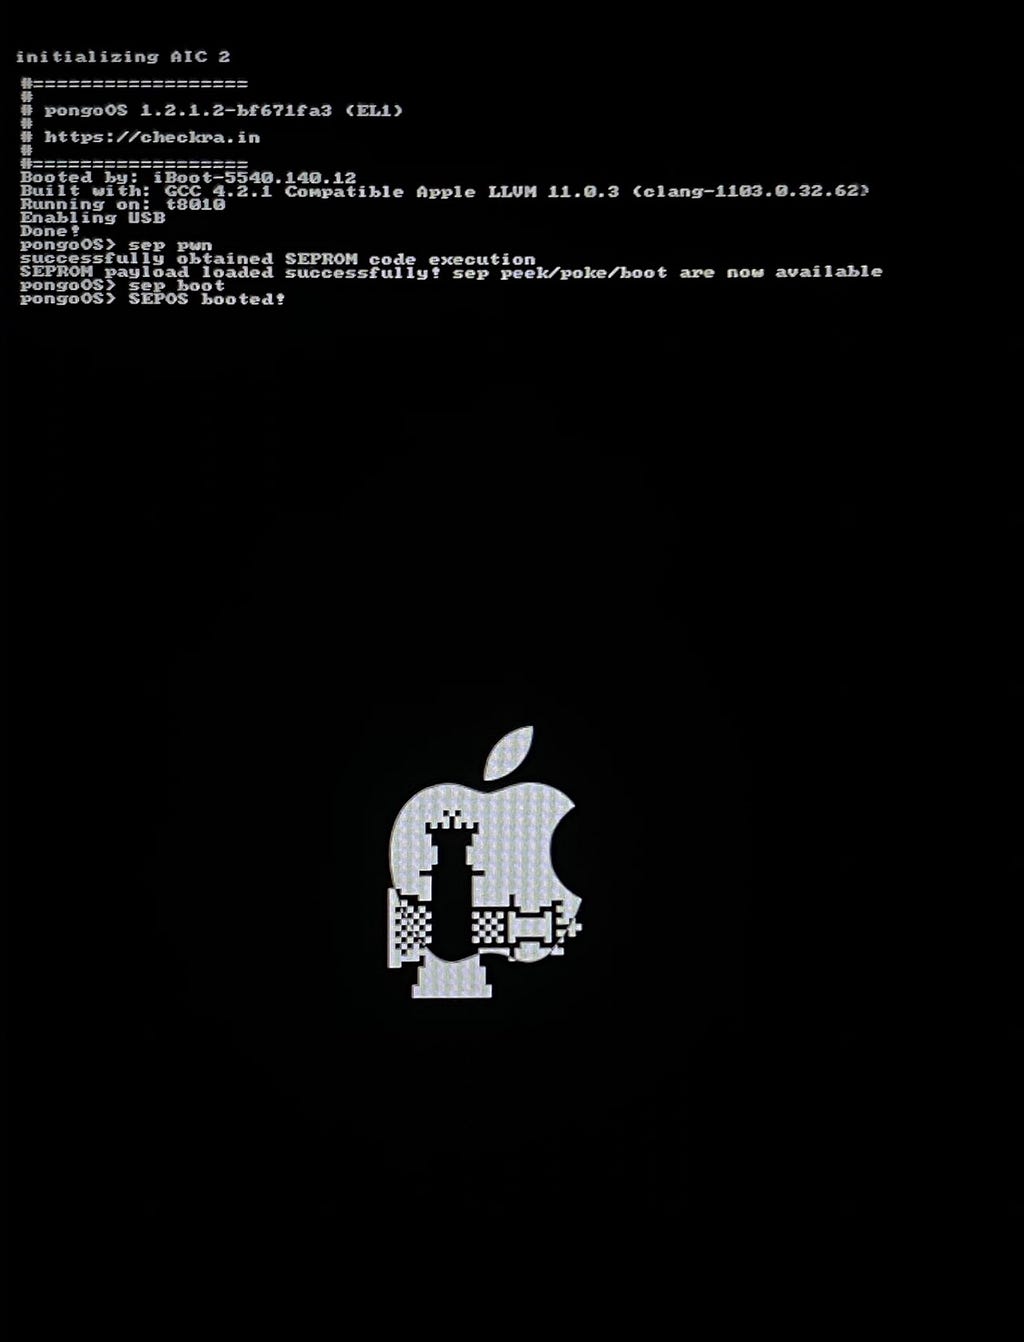 The output screen of a successful checkra1n jailbreak